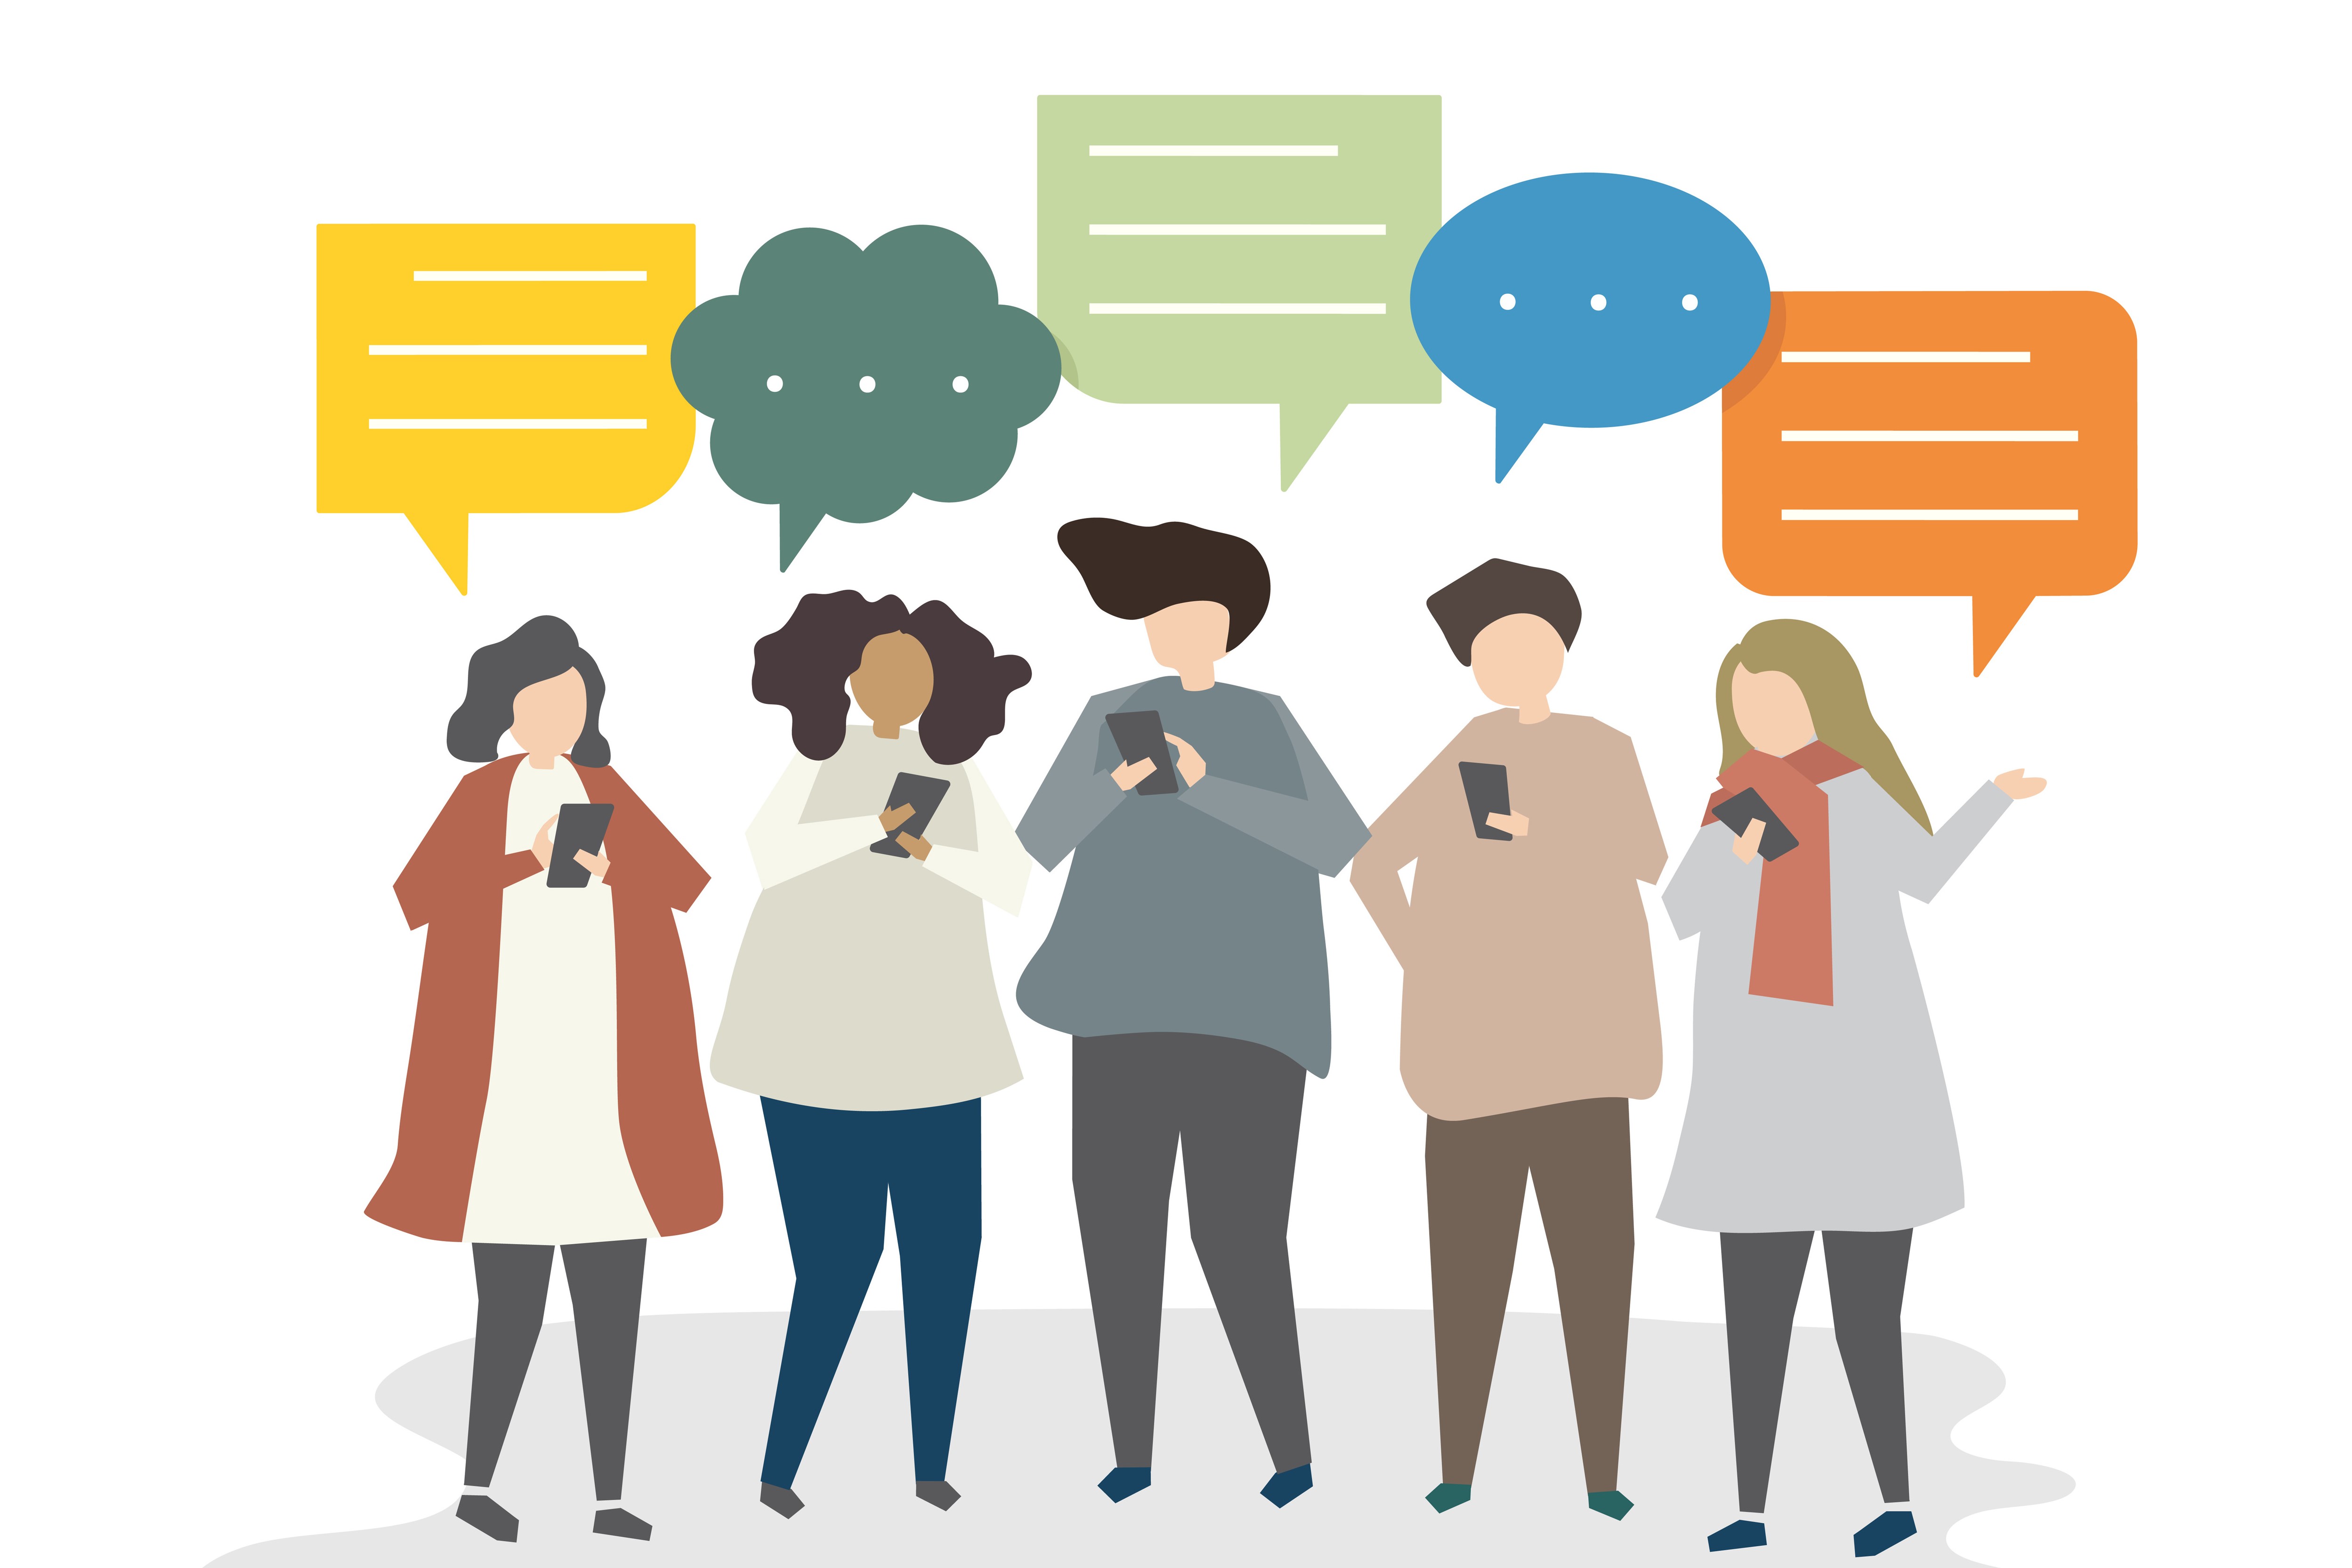 Illustration of five people looking at their mobile phones. There are thought bubbles above their heads.